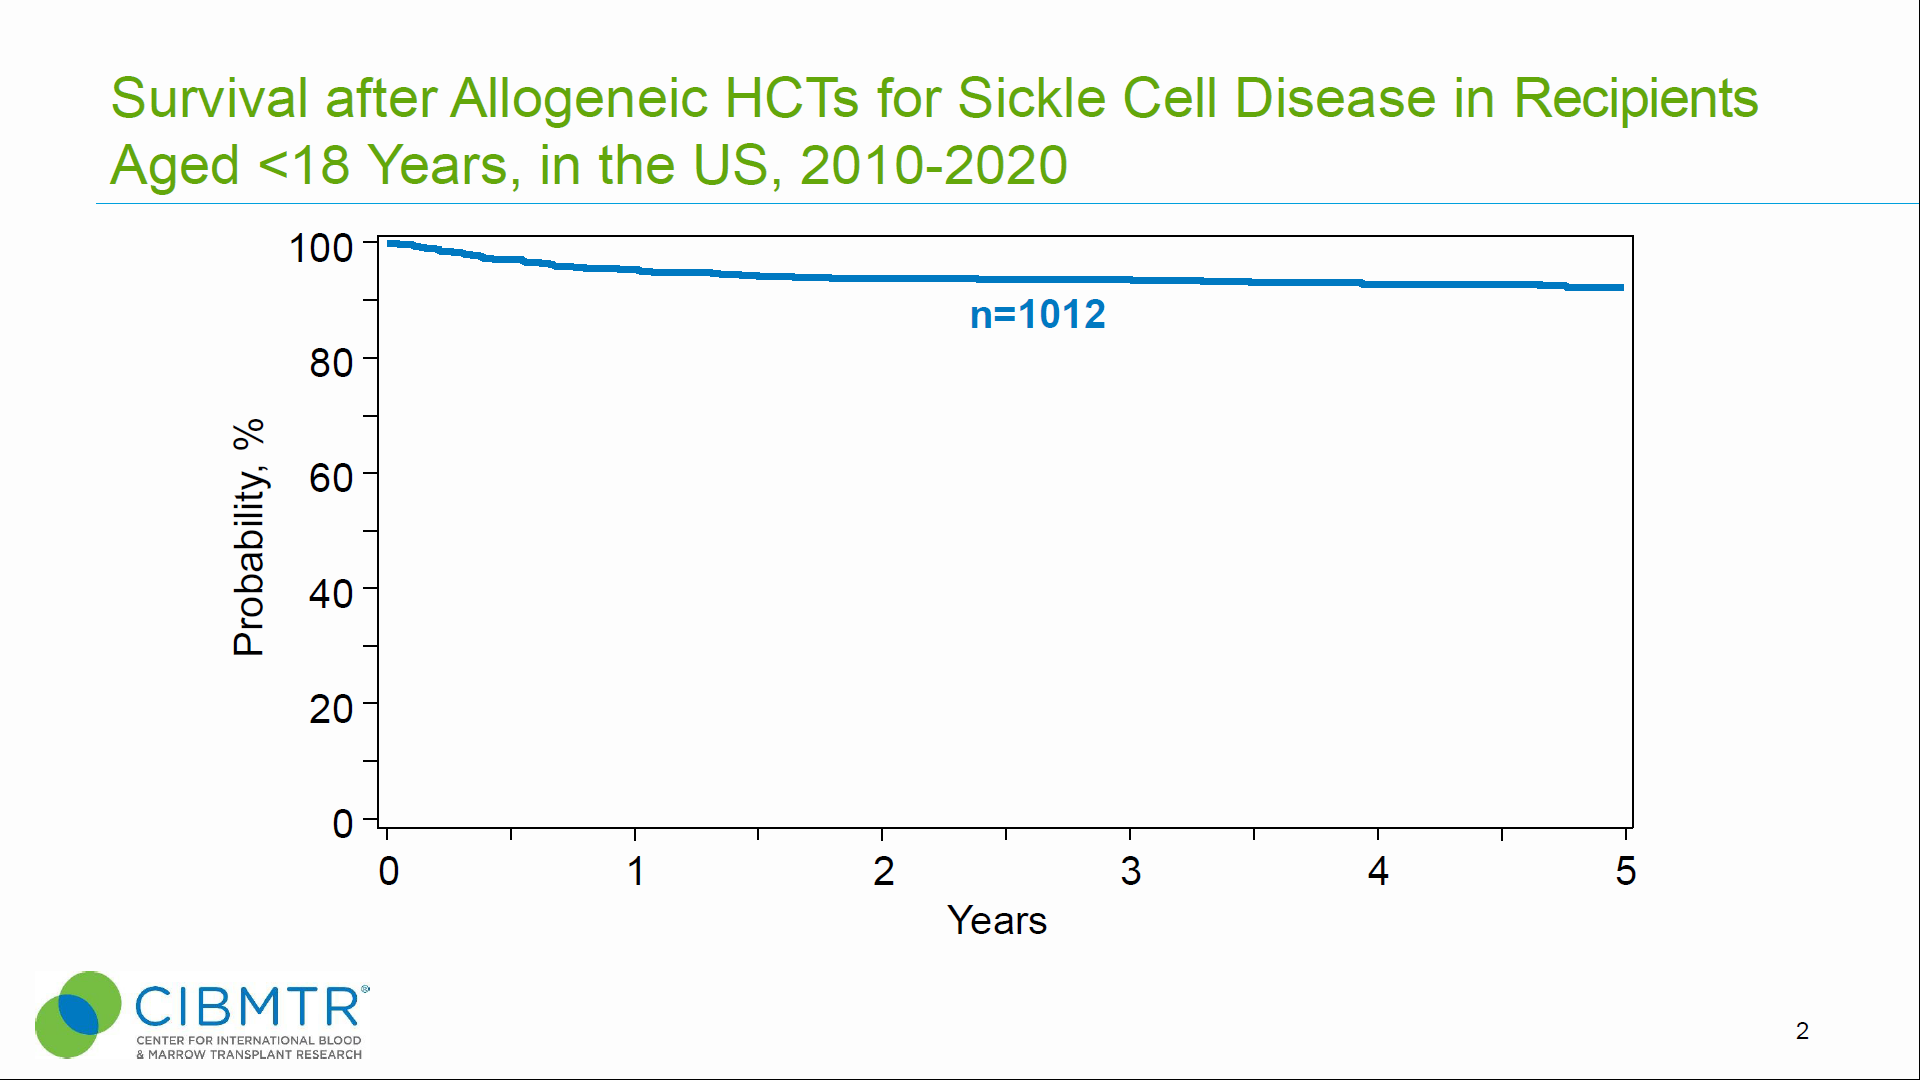 Survival after Allogeneic HCTs for Sickle Cell Disease in Recipients